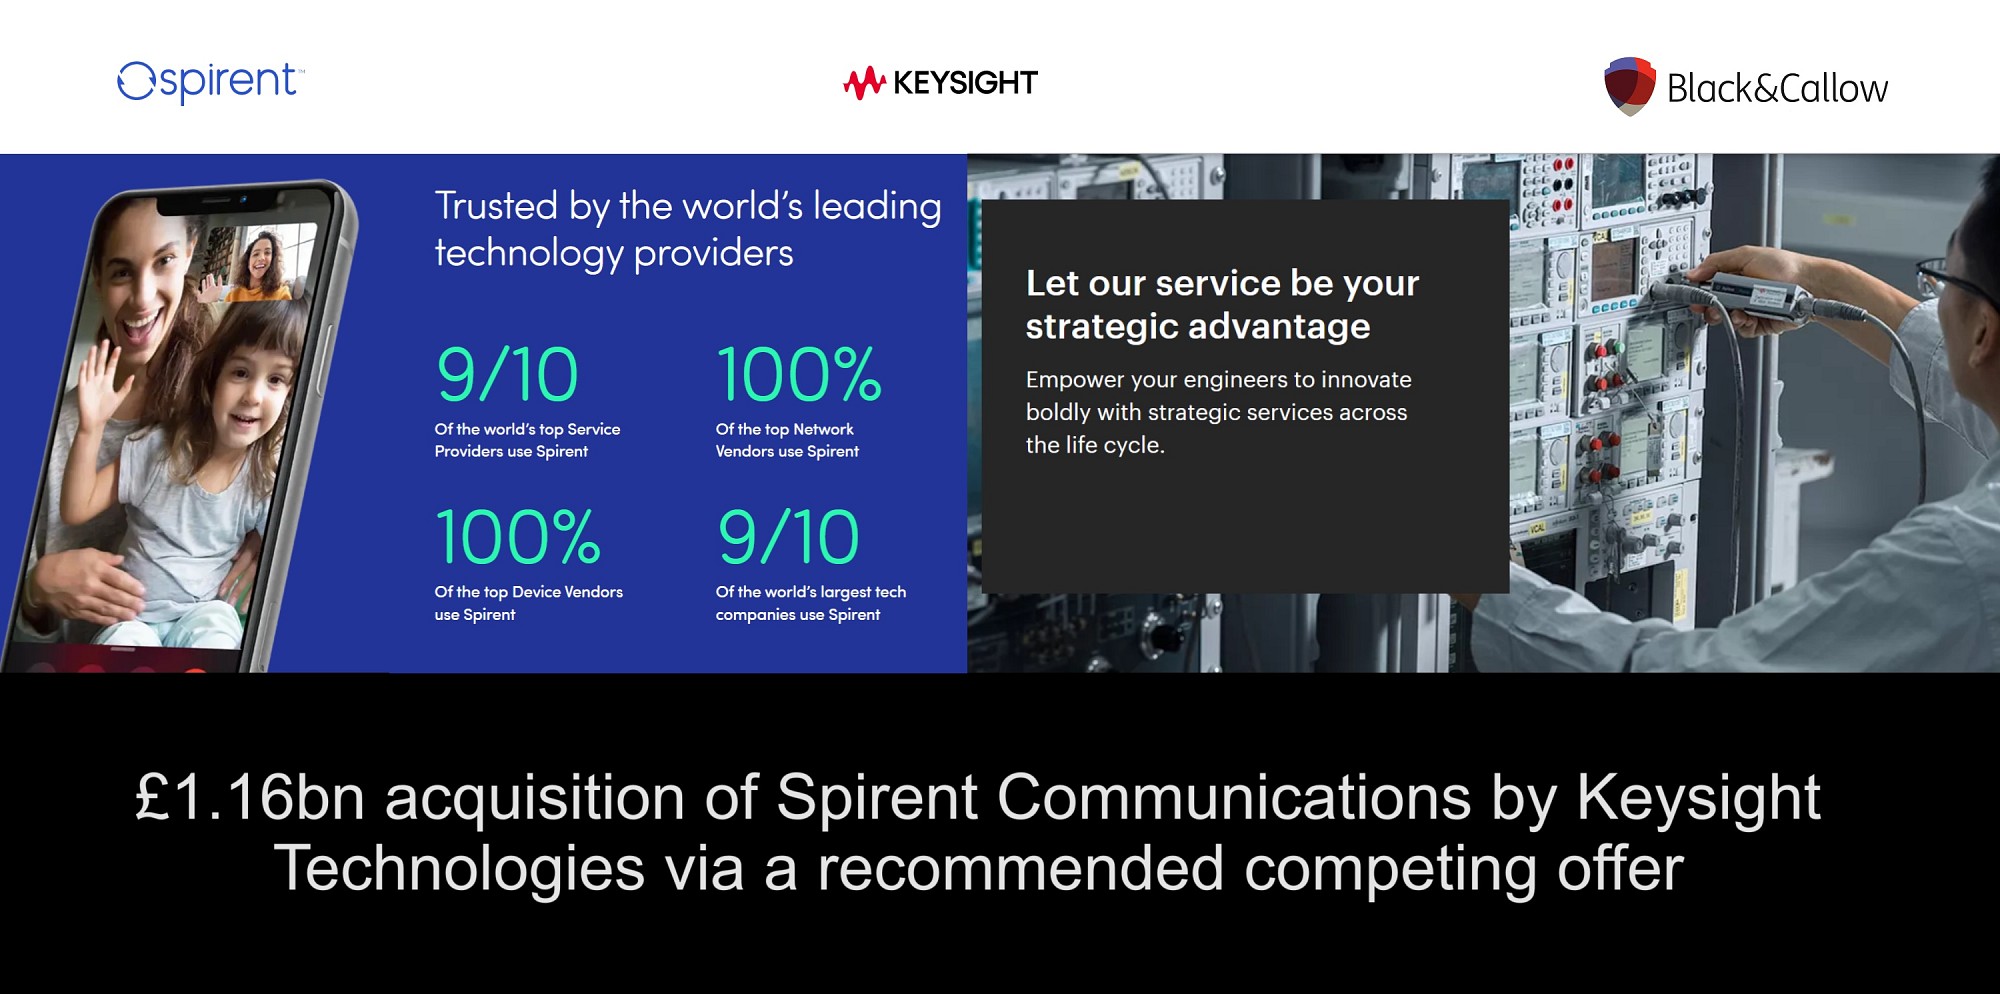 Securing the future: helping the £1.16bn offer for Spirent Communications by Keysight Technologies